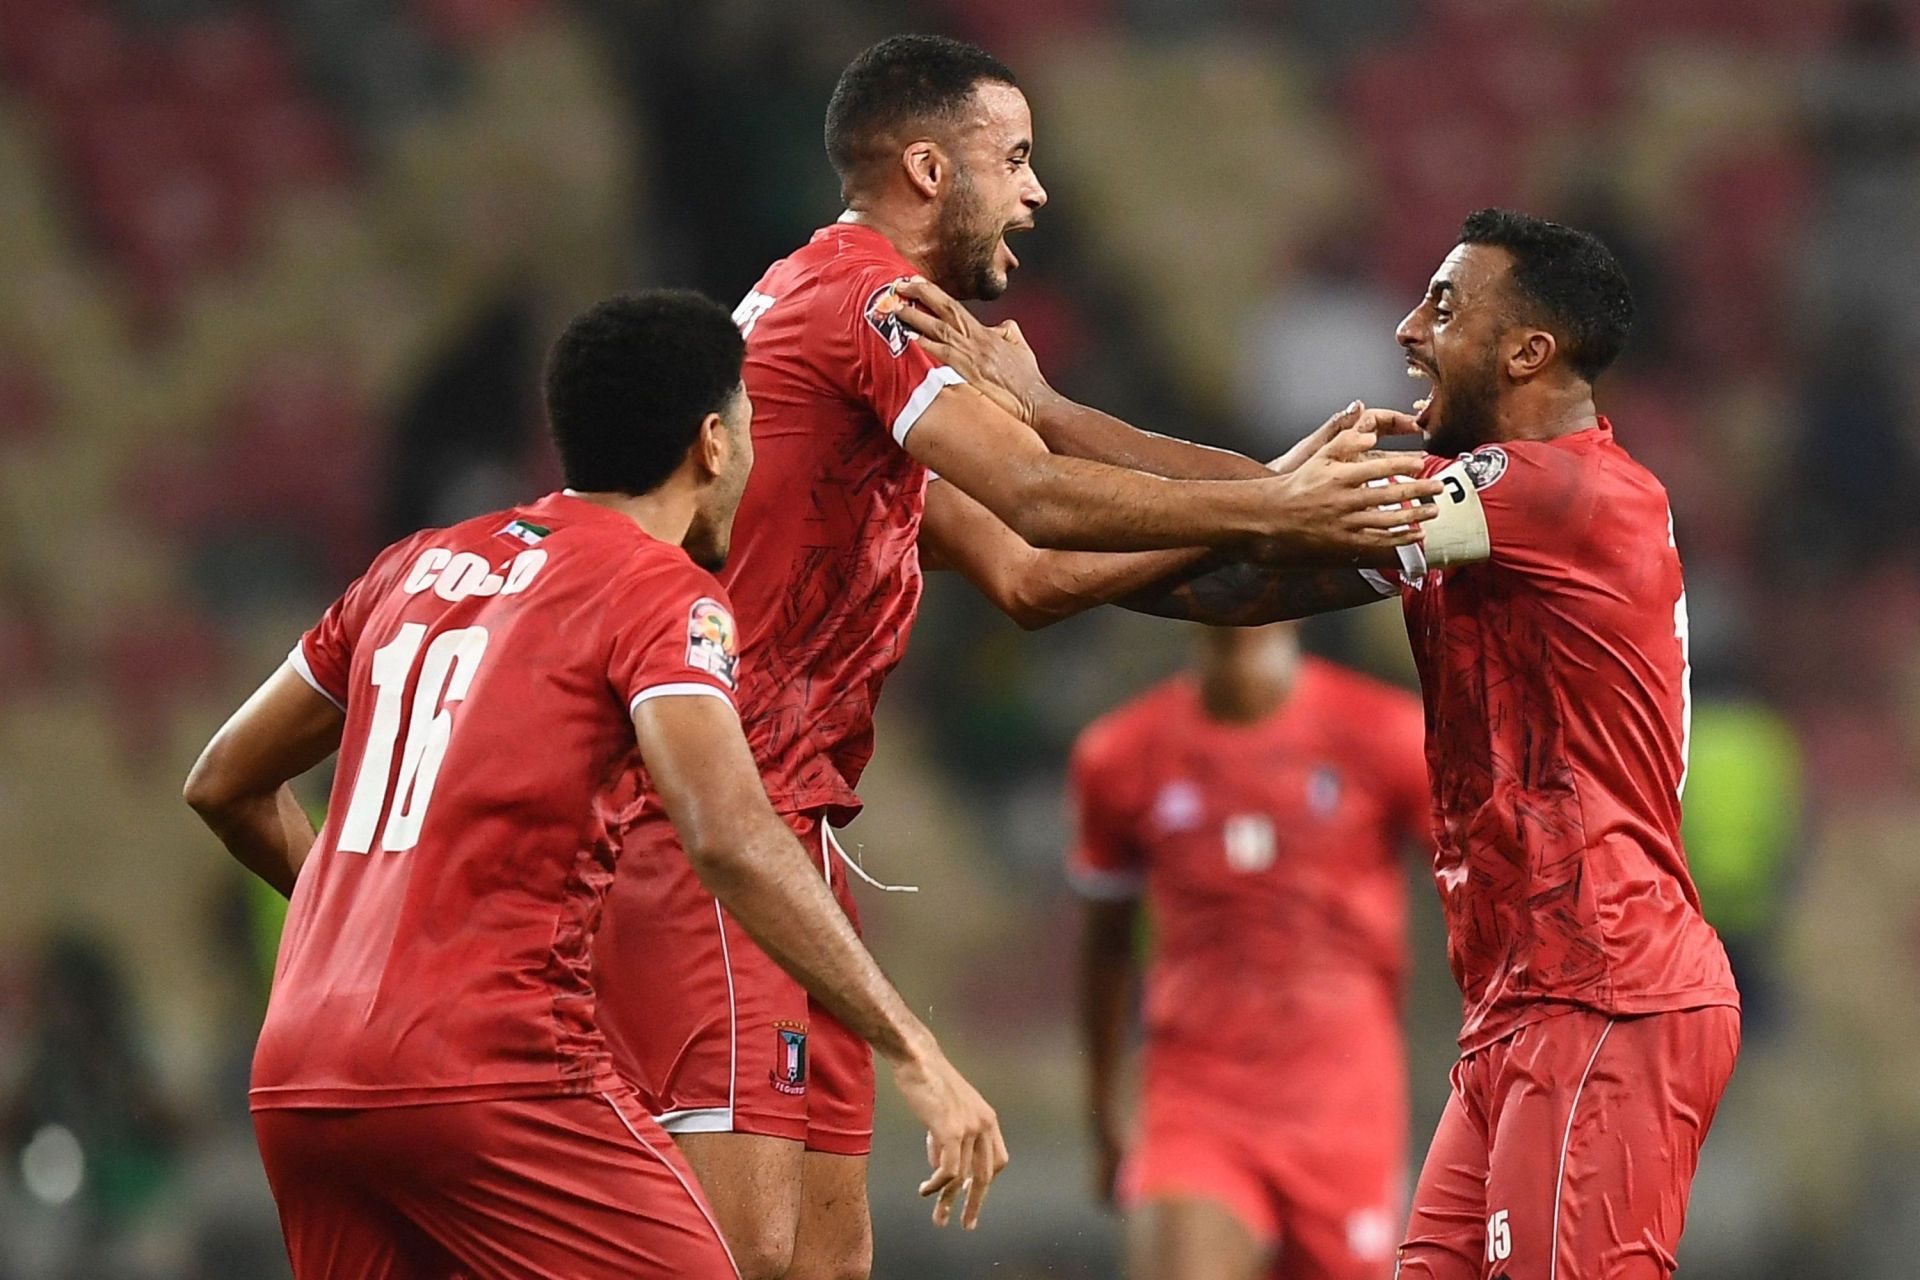 Equatorial Guinea meet Libya in the final group stage match of the AFCON 2023 qualifiers on Wednesday